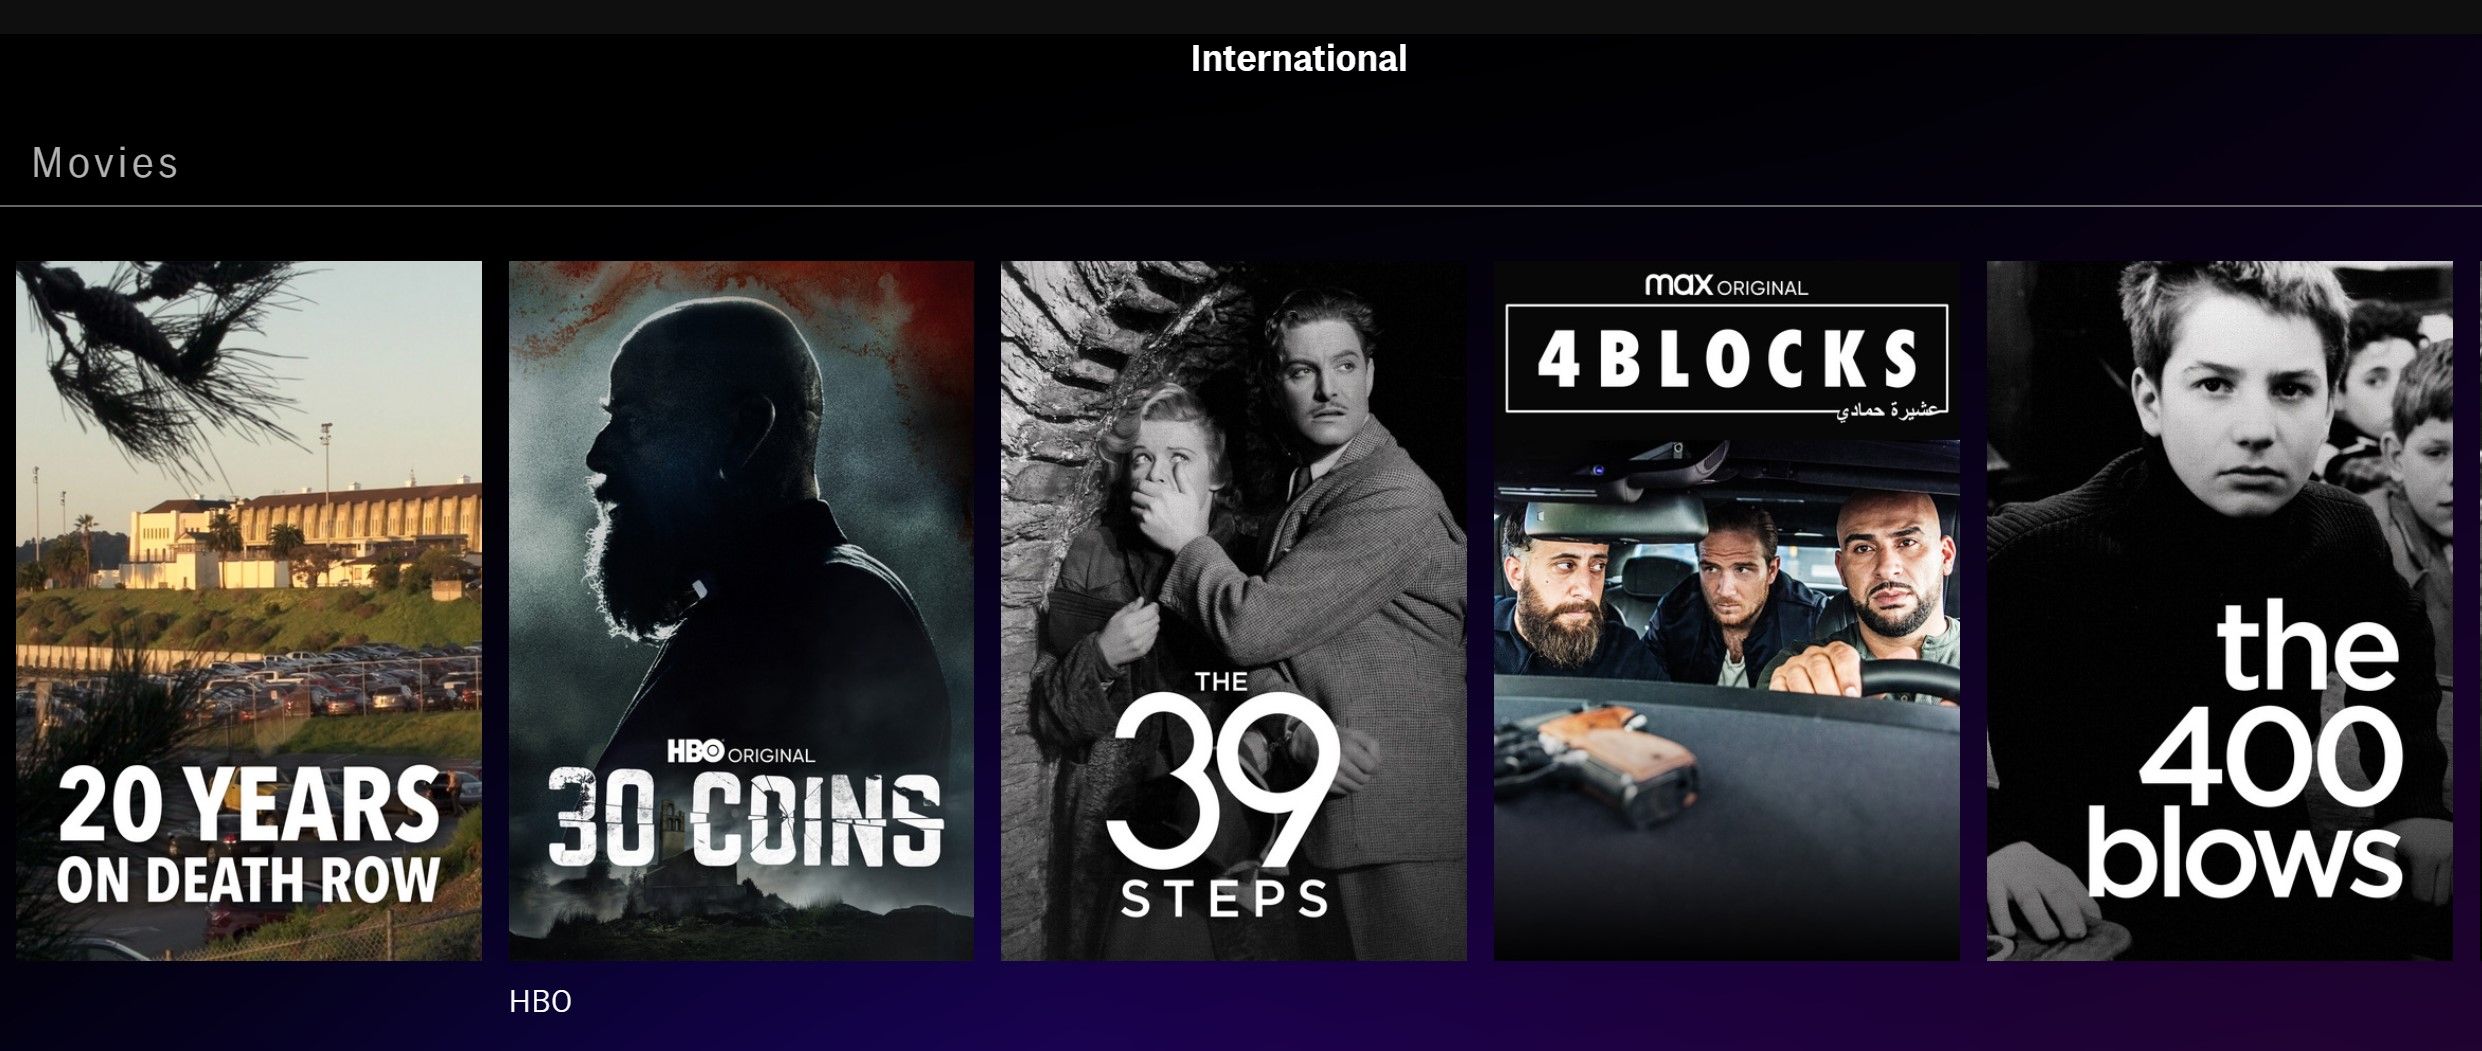 The International Movies page on the HBO Max app